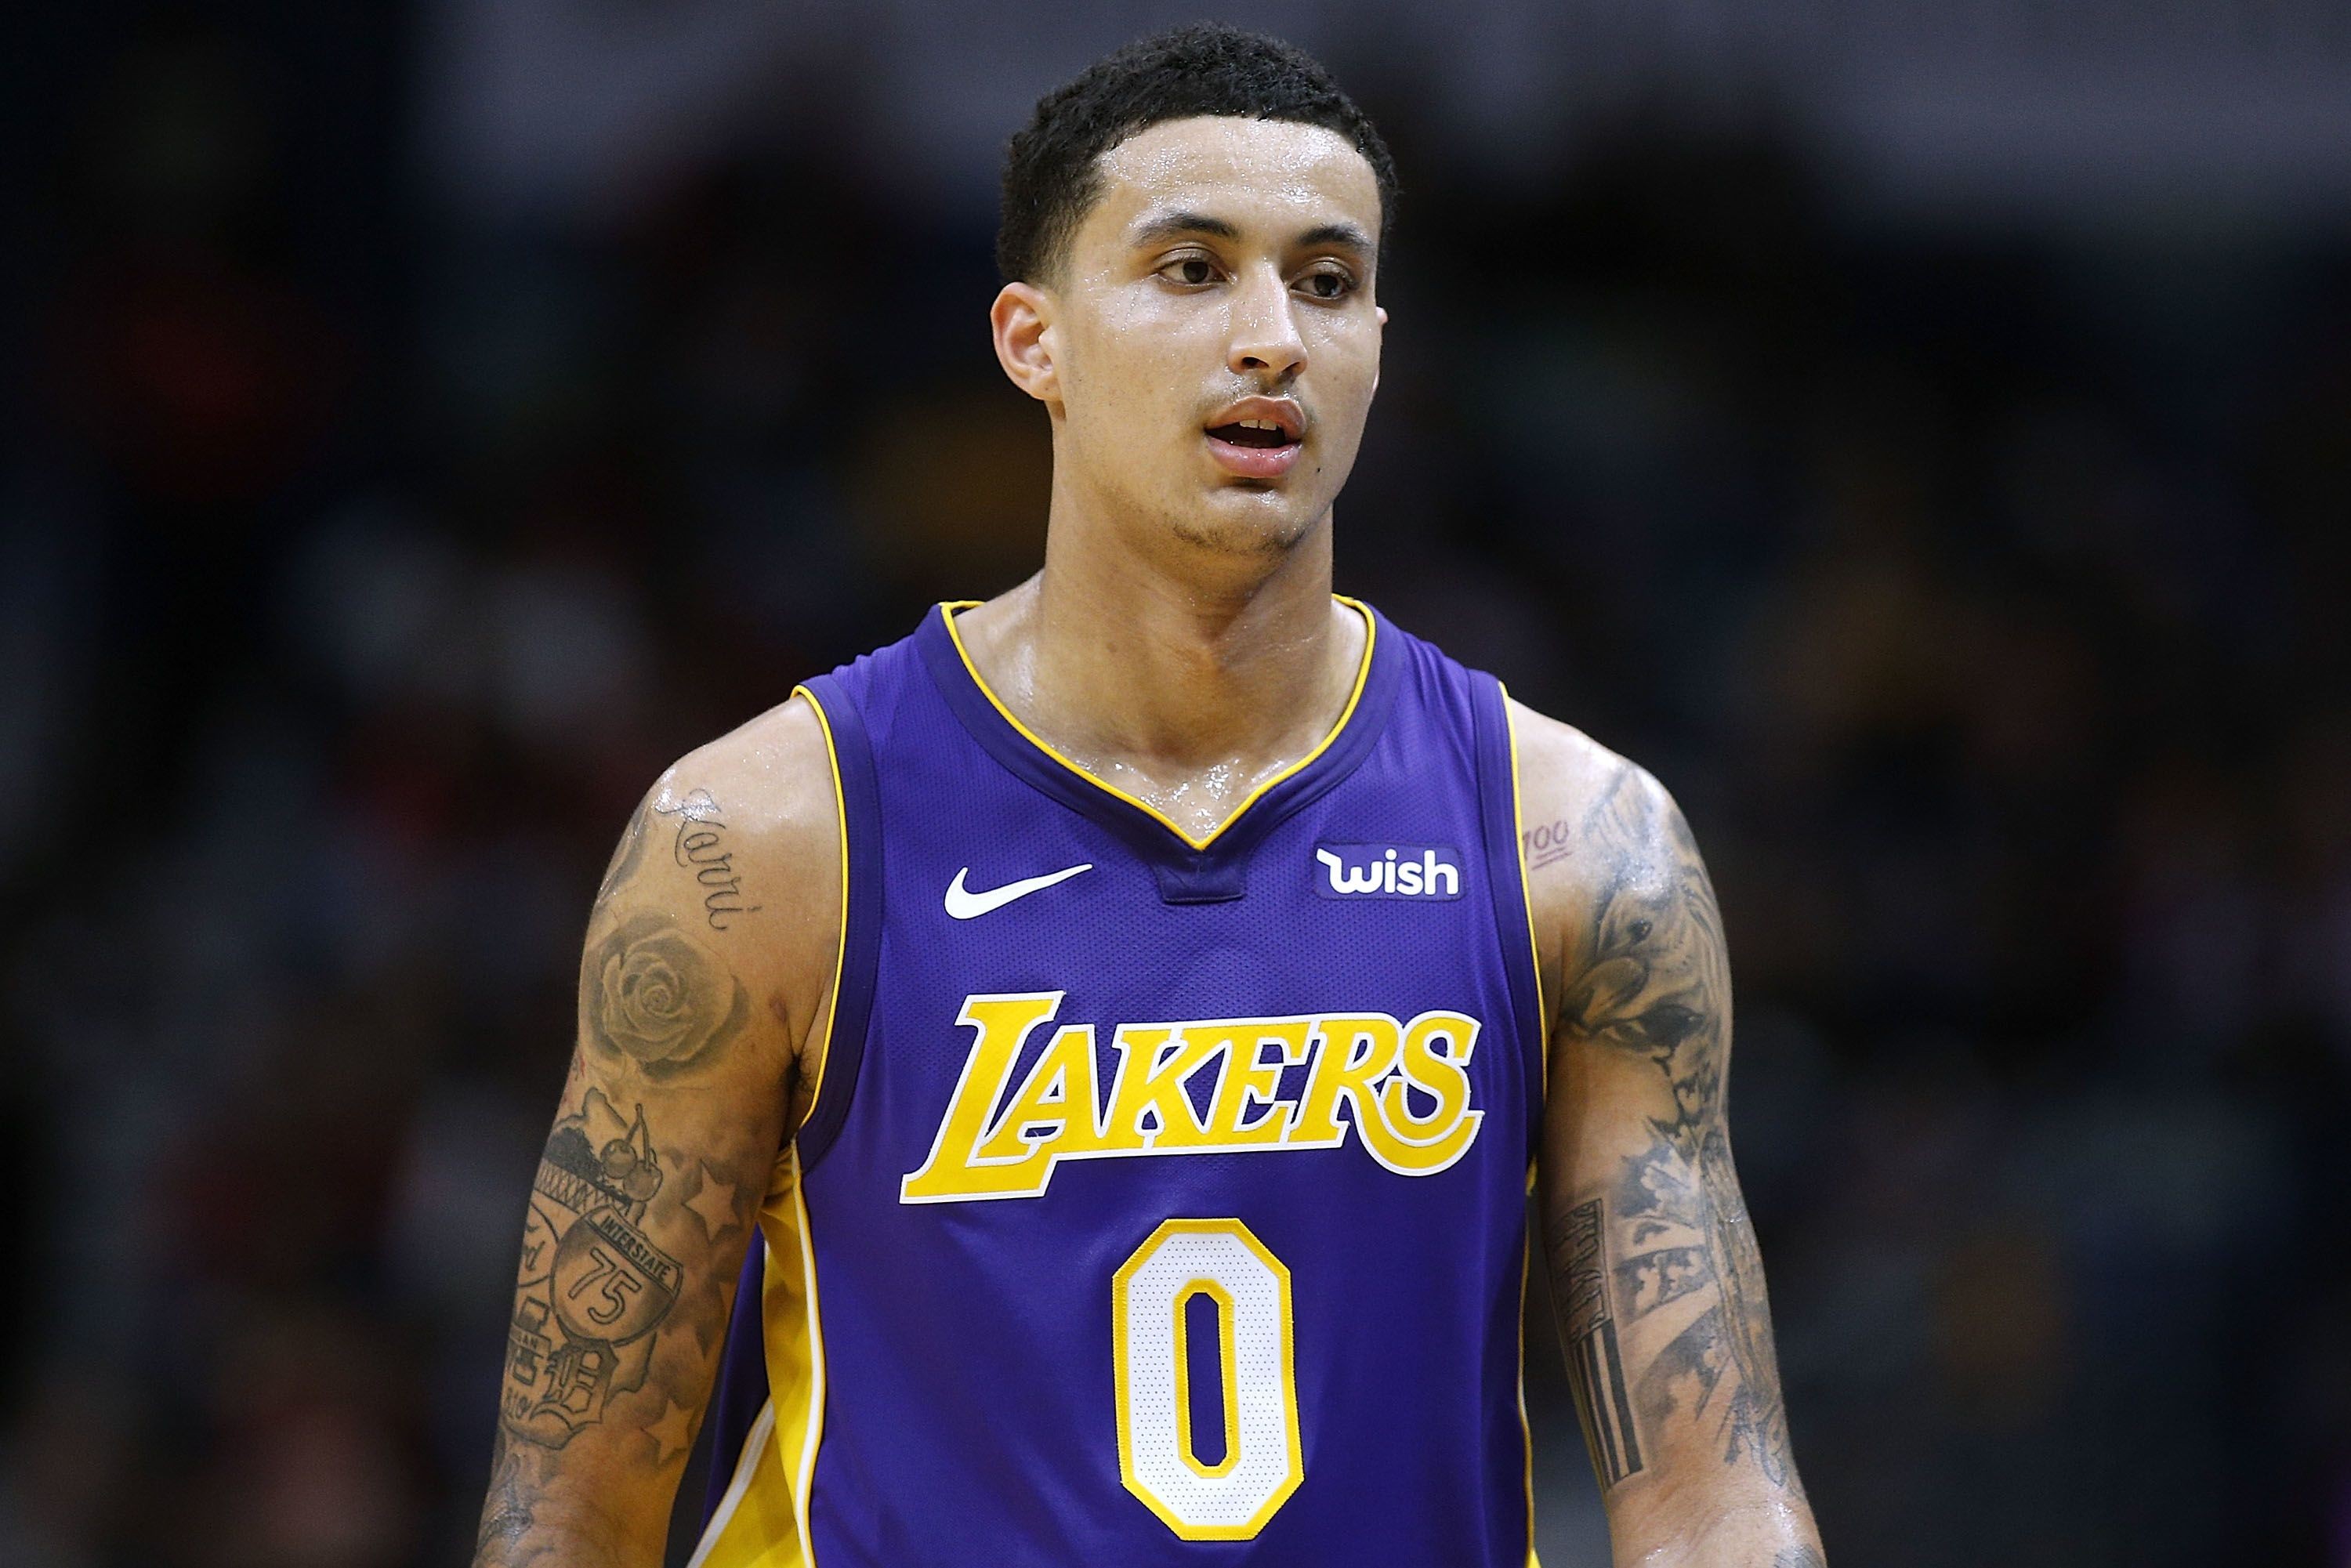 On nba 2k21, the current version of kyle kuzma has an overall 2k rating of ...